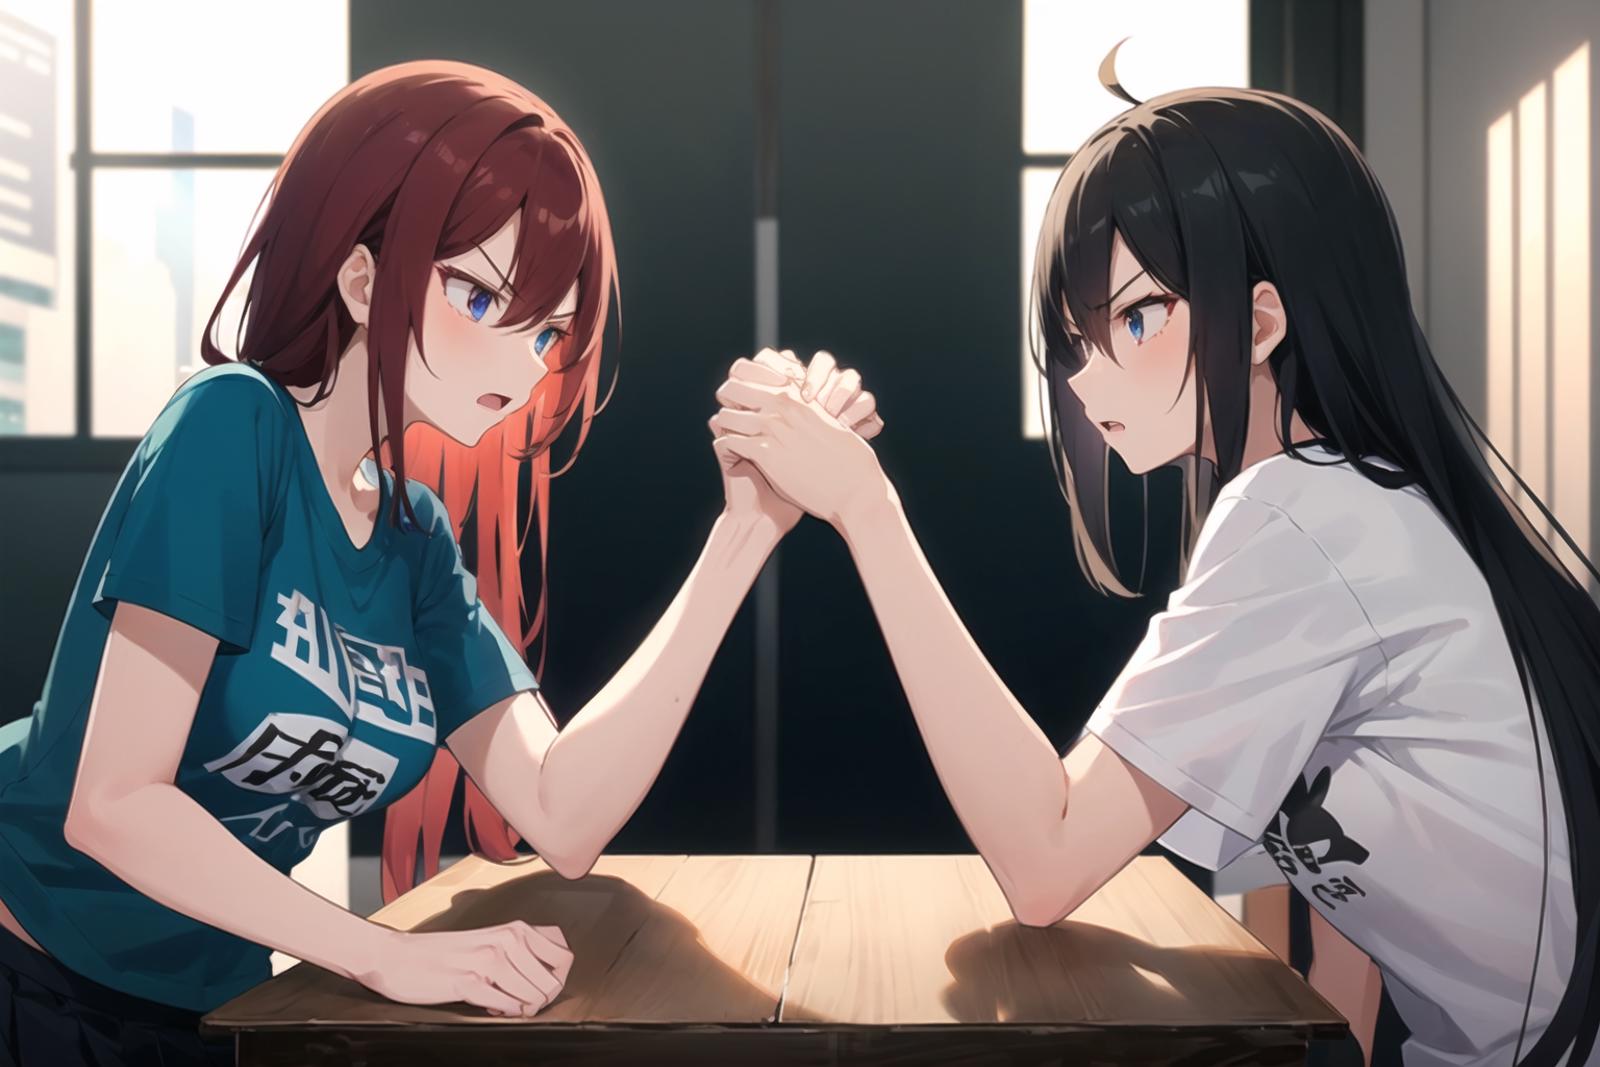 [OpenPose + Canny] Arm wrestling image by BlazzzX4